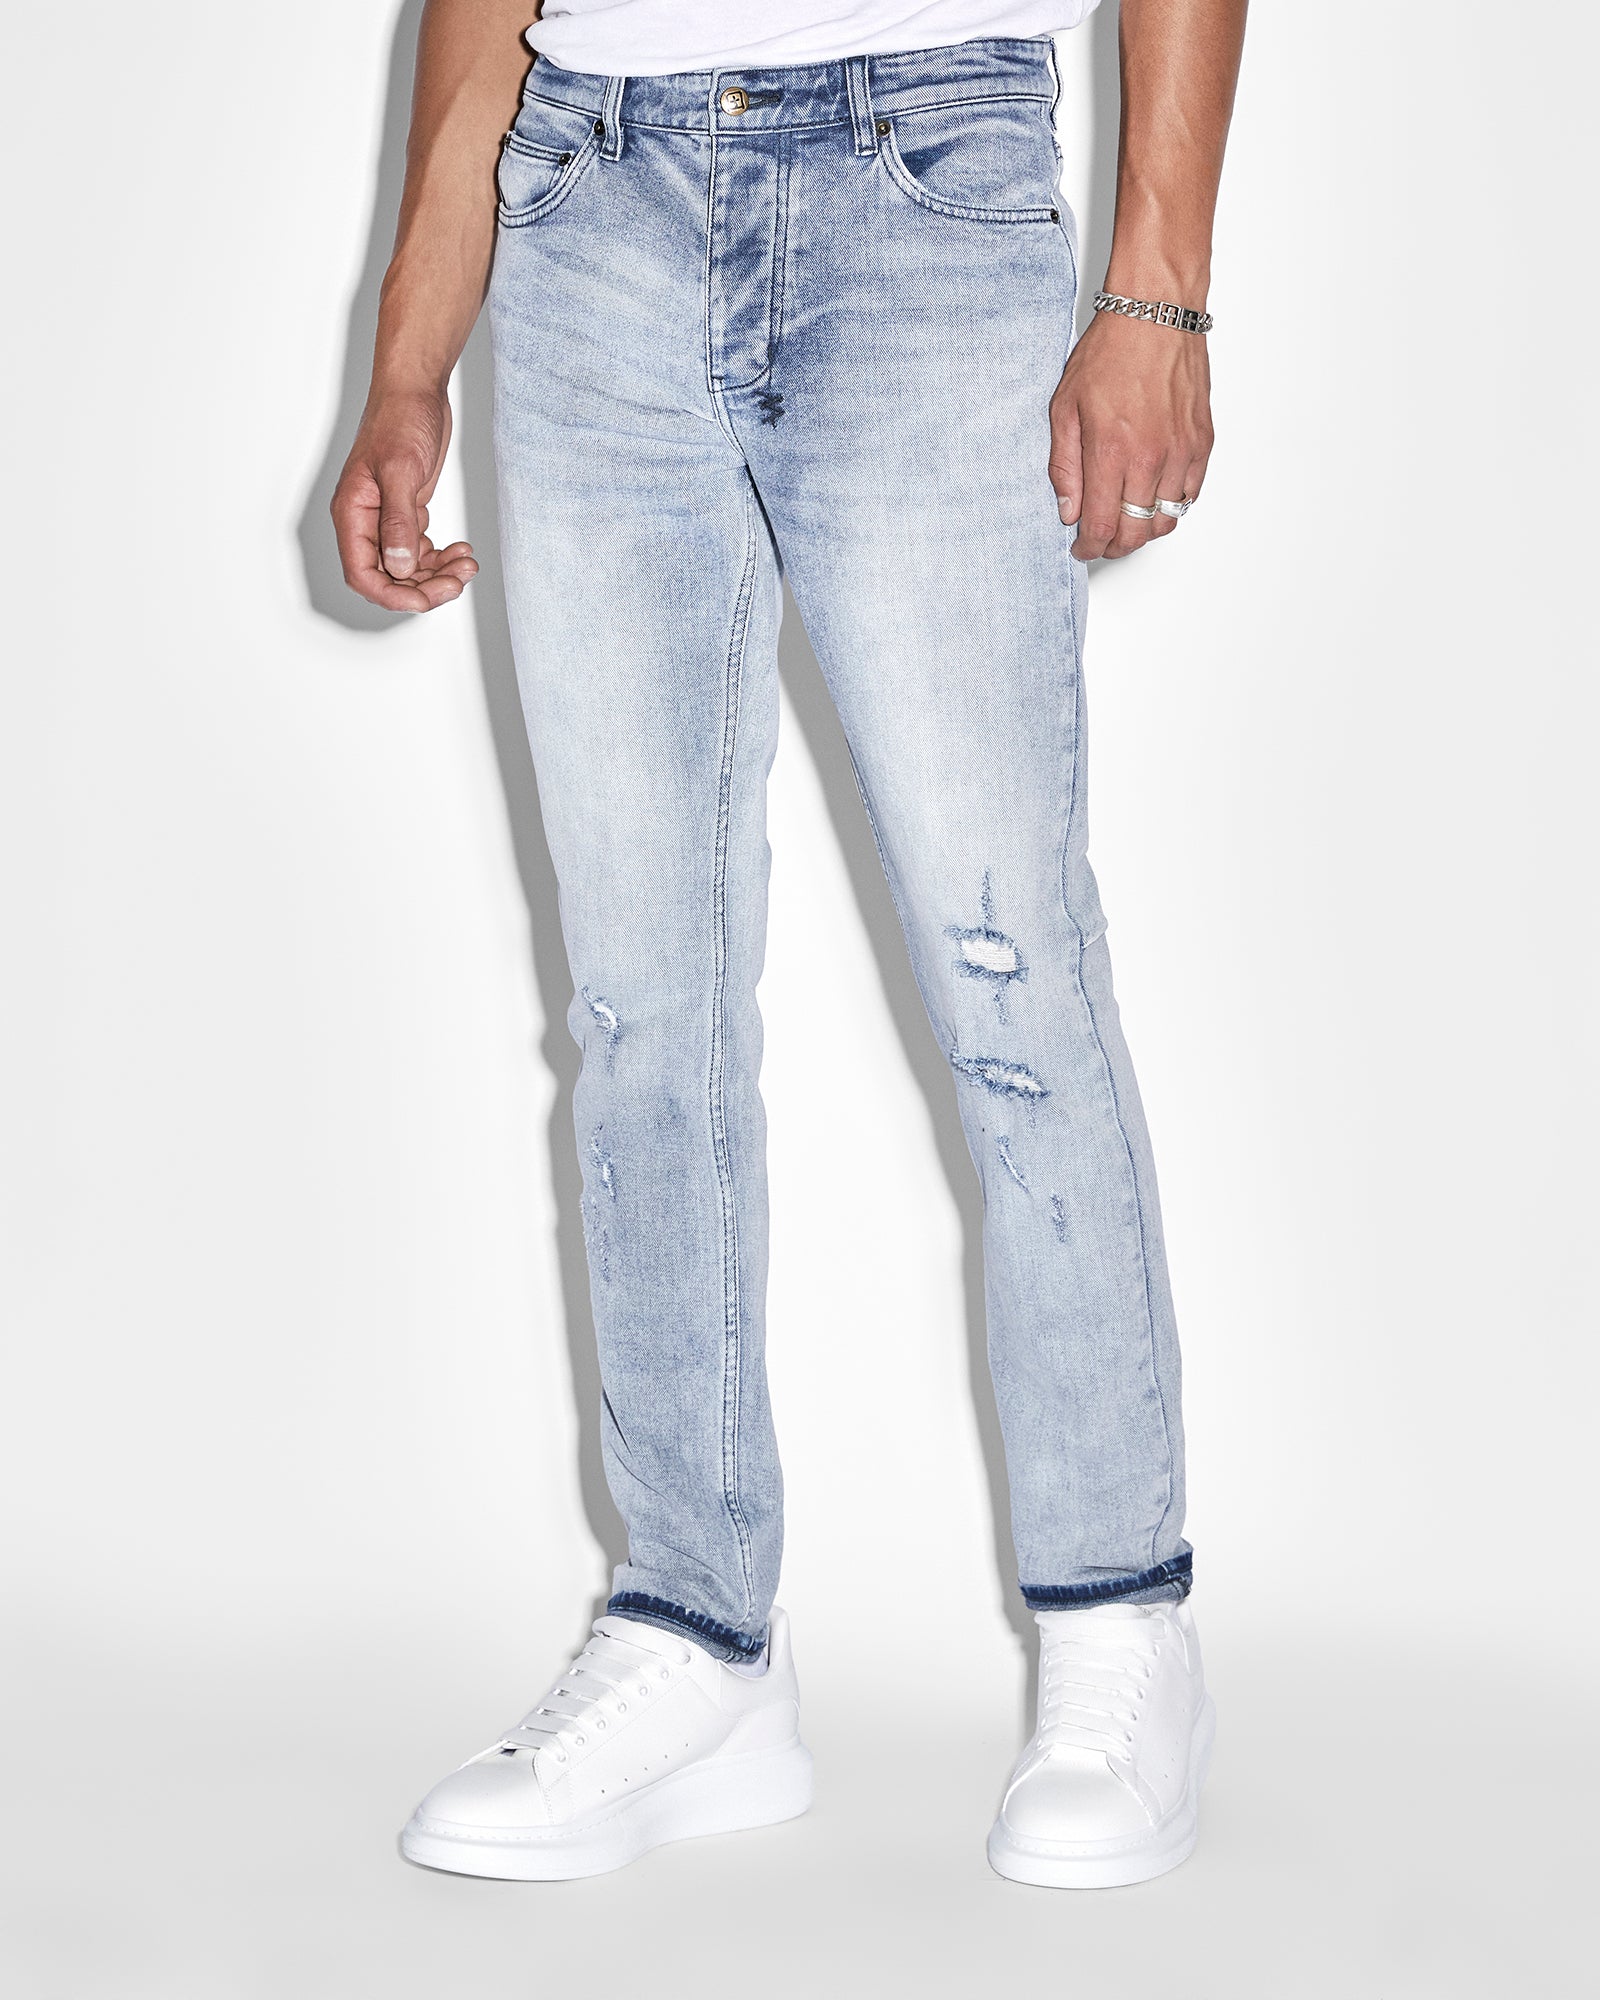 Dylan Slim Fit Jeans Retro Blue For Tall Men | American Tall